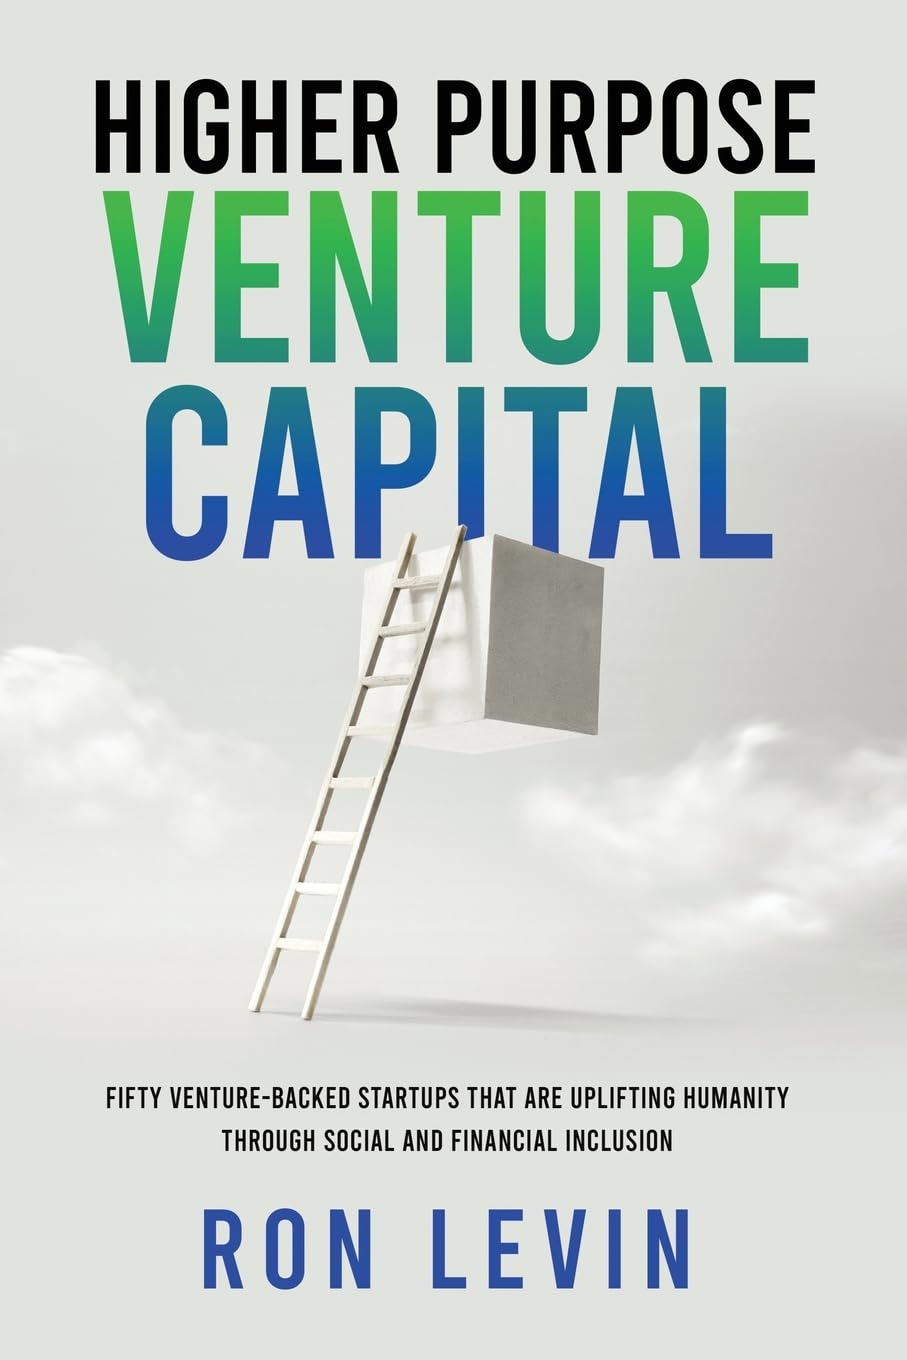 New book "Higher Purpose Venture Capital" by Ron Levin is released, a review of socially-minded entrepreneurs advancing opportunities for vulnerable and underprivileged members of society